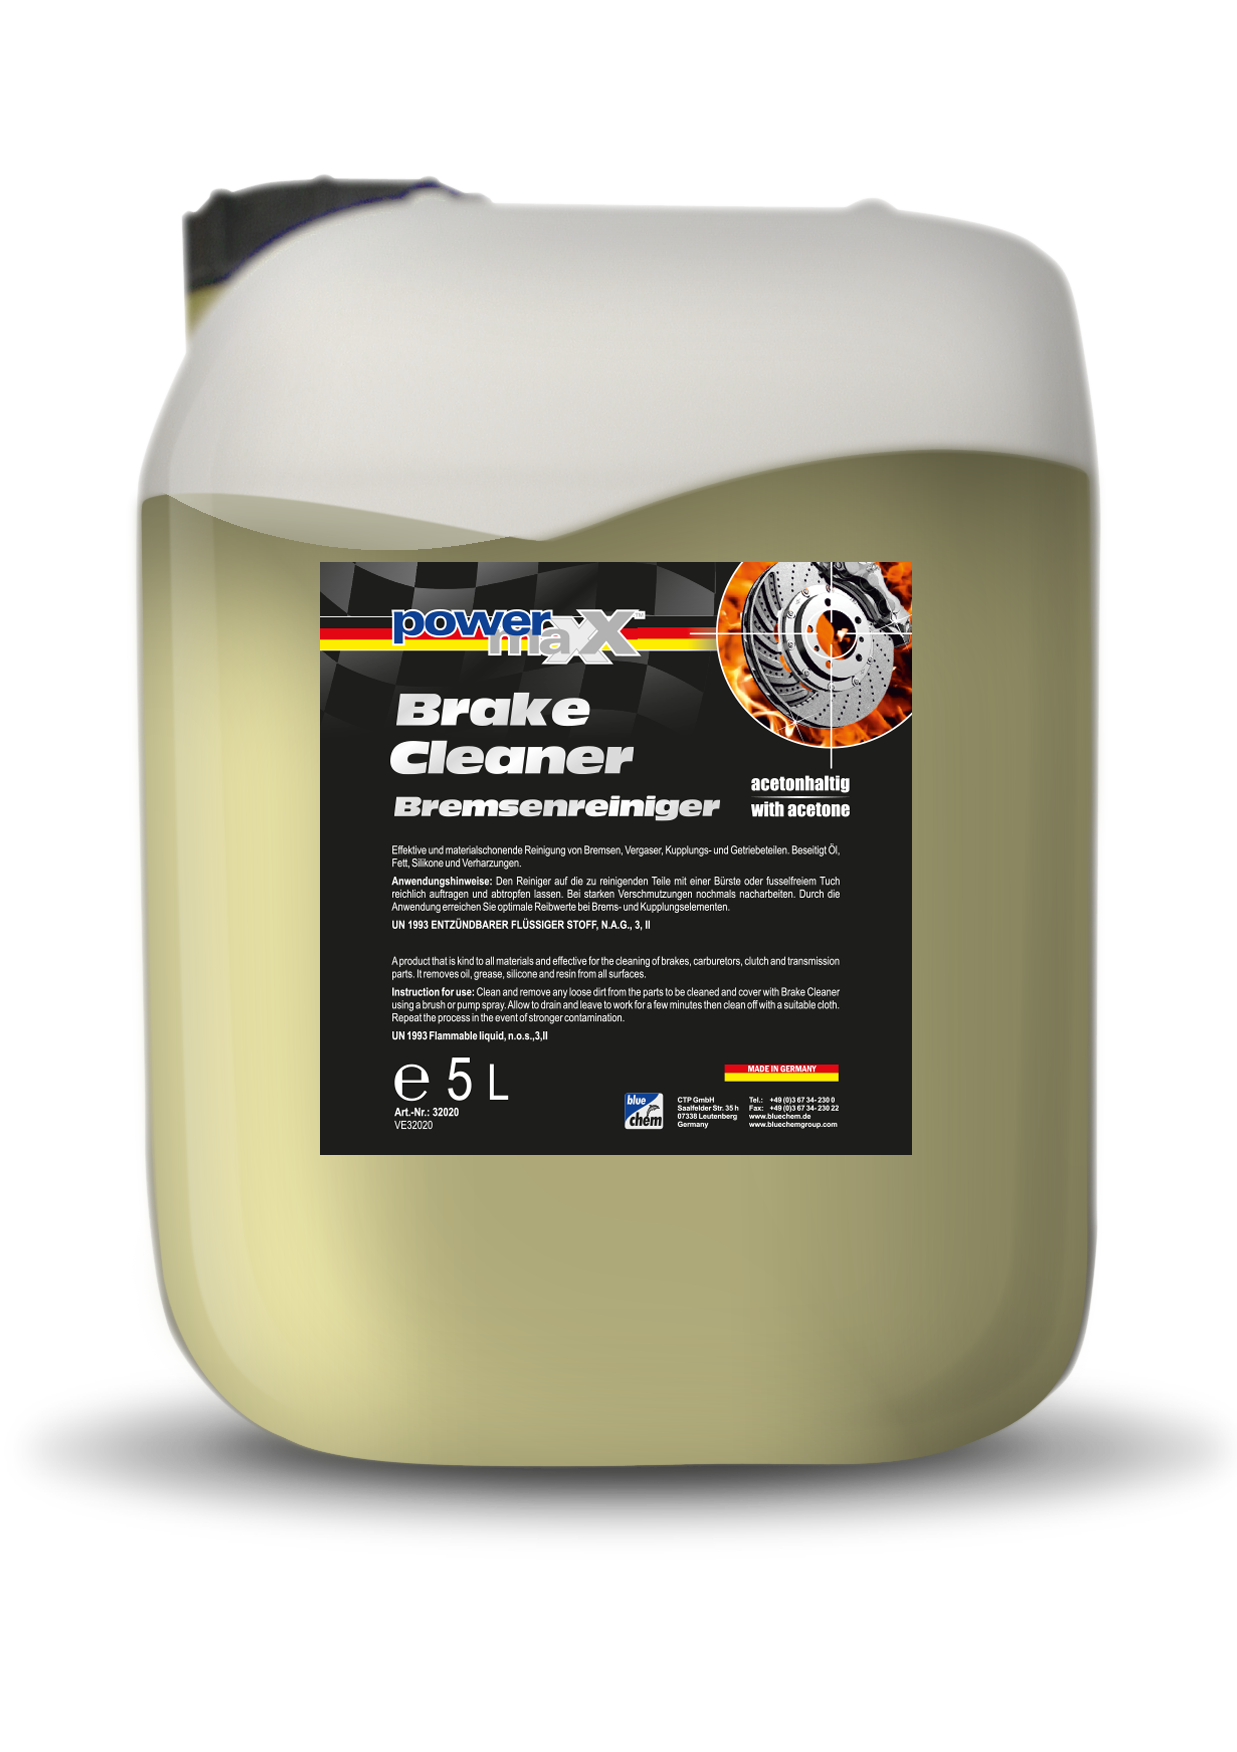 Brake Cleaner with acetone – Fluid - bluechemGROUP